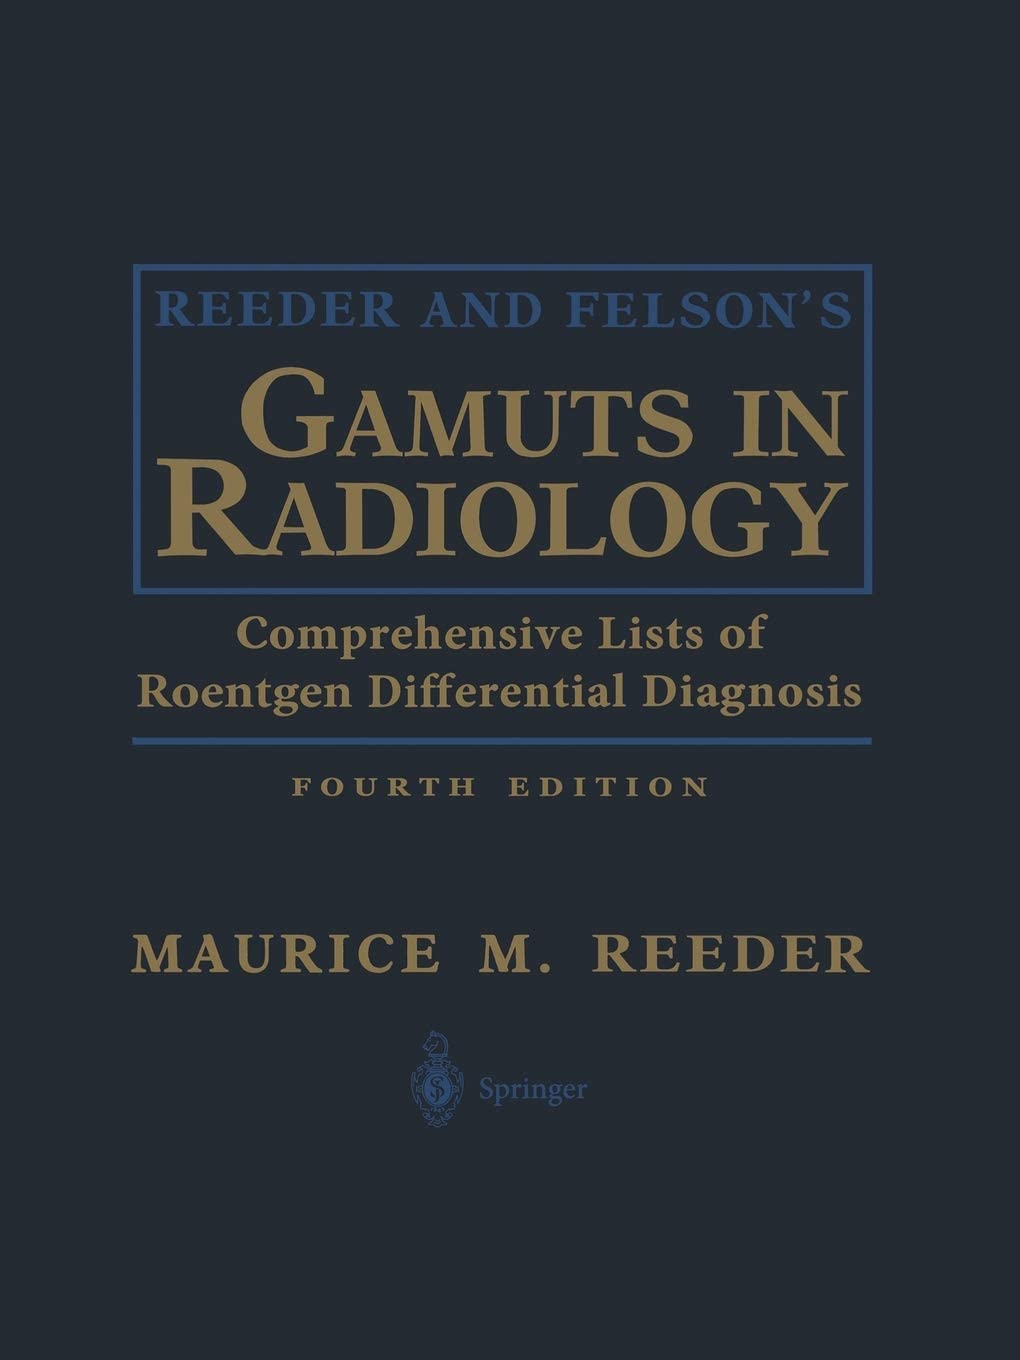 Reeder and Felson&rsquo;s Gamuts in Radiology: Comprehensive Lists of Roentgen Differential Diagnosis